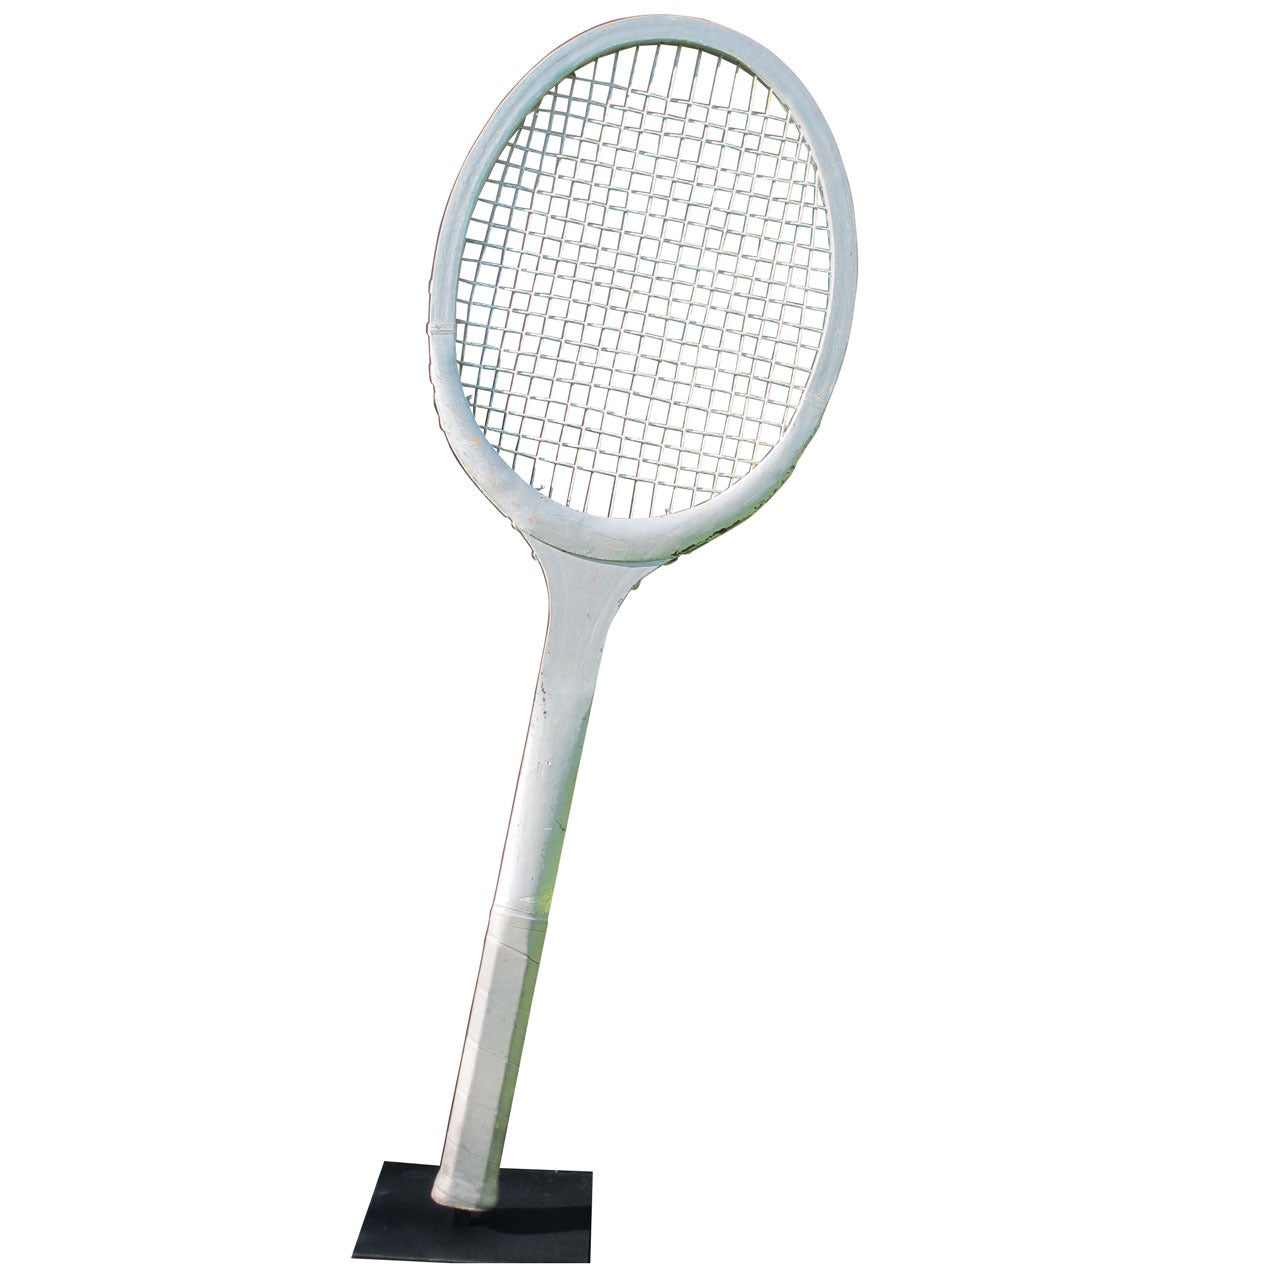 Giant Tennis Racquet For Sale